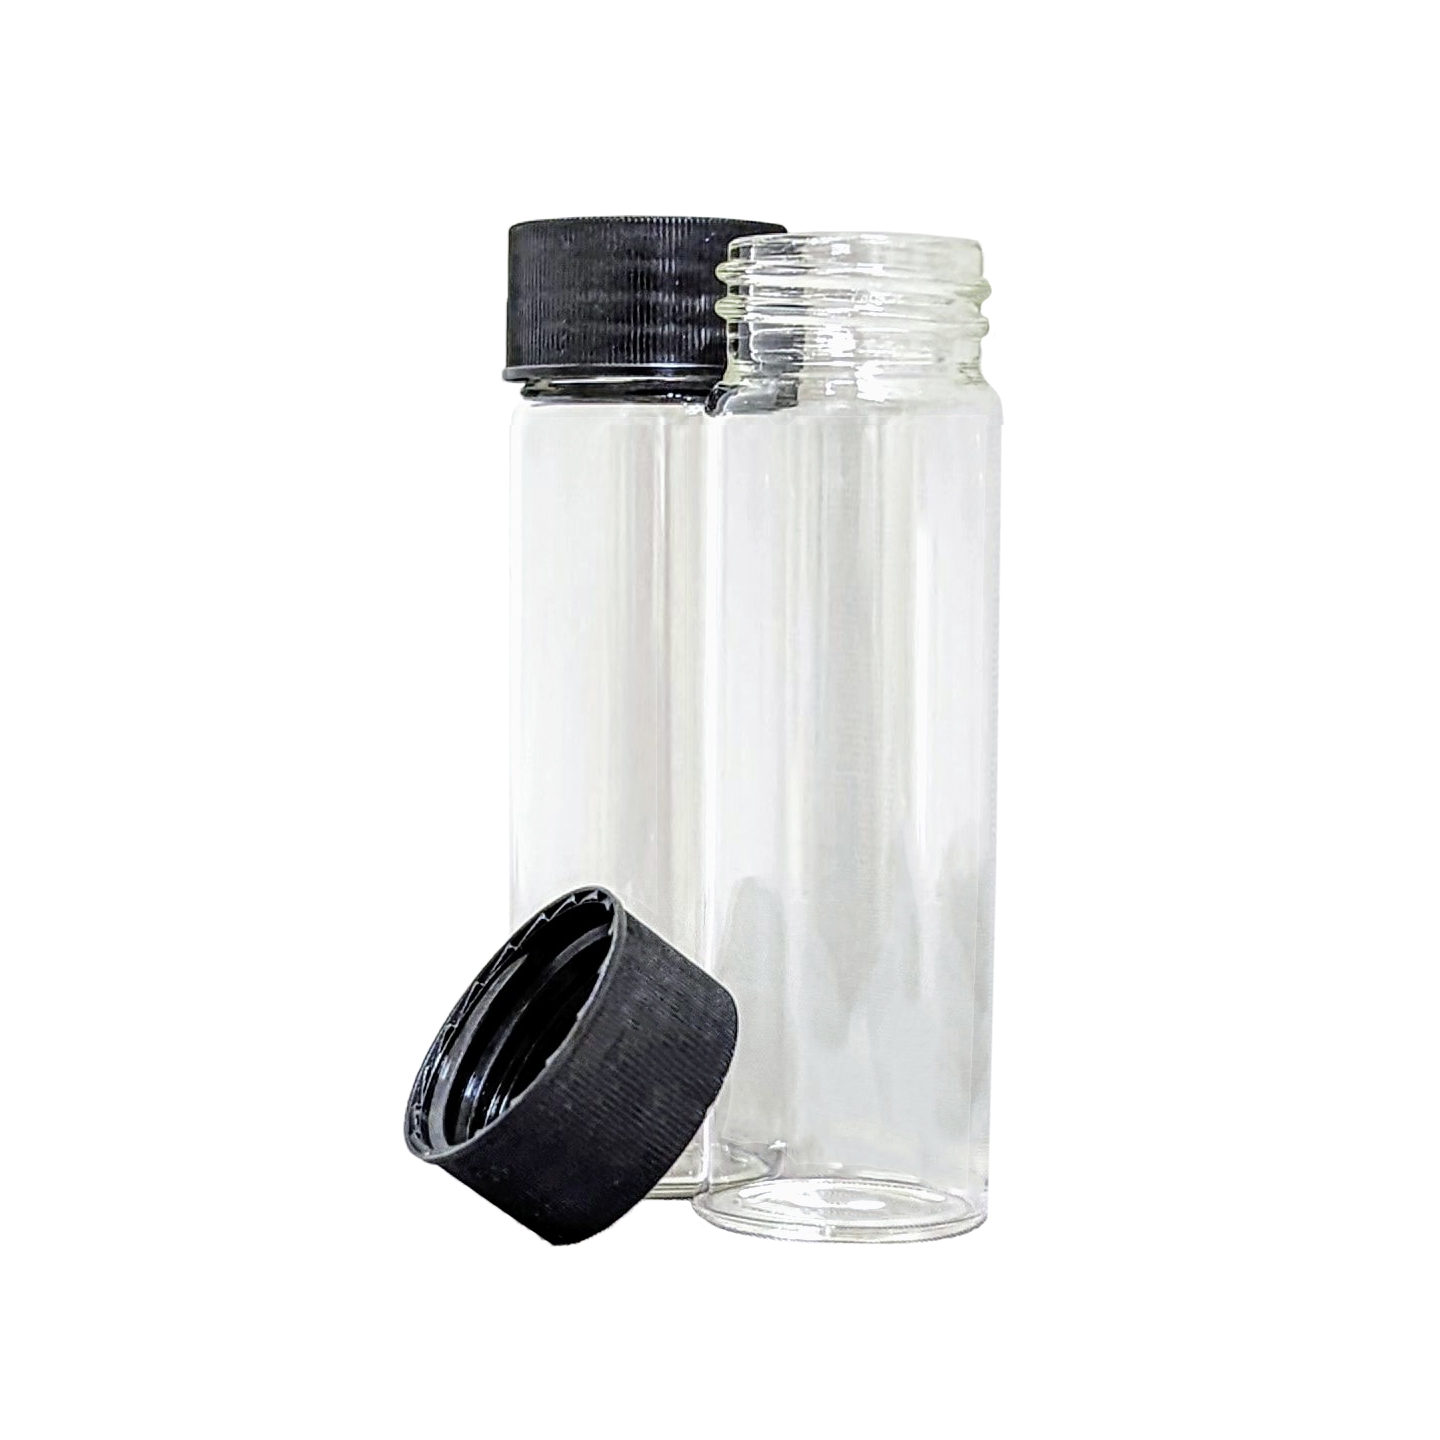 Vial, Screw Neck Vials, Tall Form, Capacity 21.25ml, With Unattached Polypropylene Closure